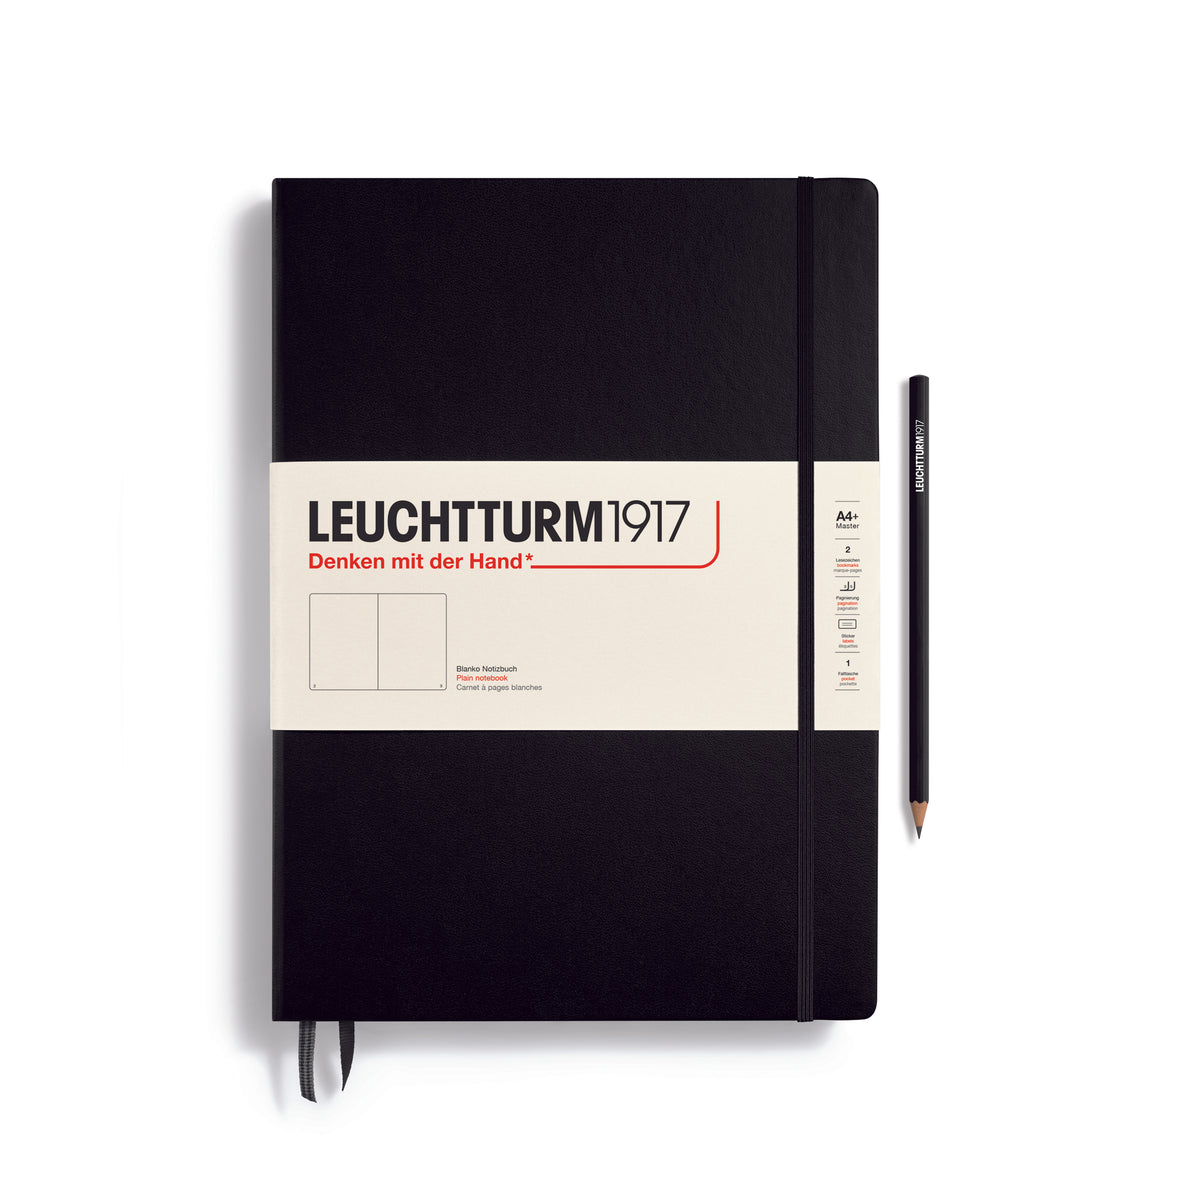 A large black notebook with a white paper band around it with the logo of the brand Leuchtturm1917. Below this is an image of the page ruling inside - in this case, plain or blank. It has two page marker ribbons showing at the bottom near the binding and an elastic notebook closure holding it neatly together. A black Leuchtturm pencil is shown at the side of the book.